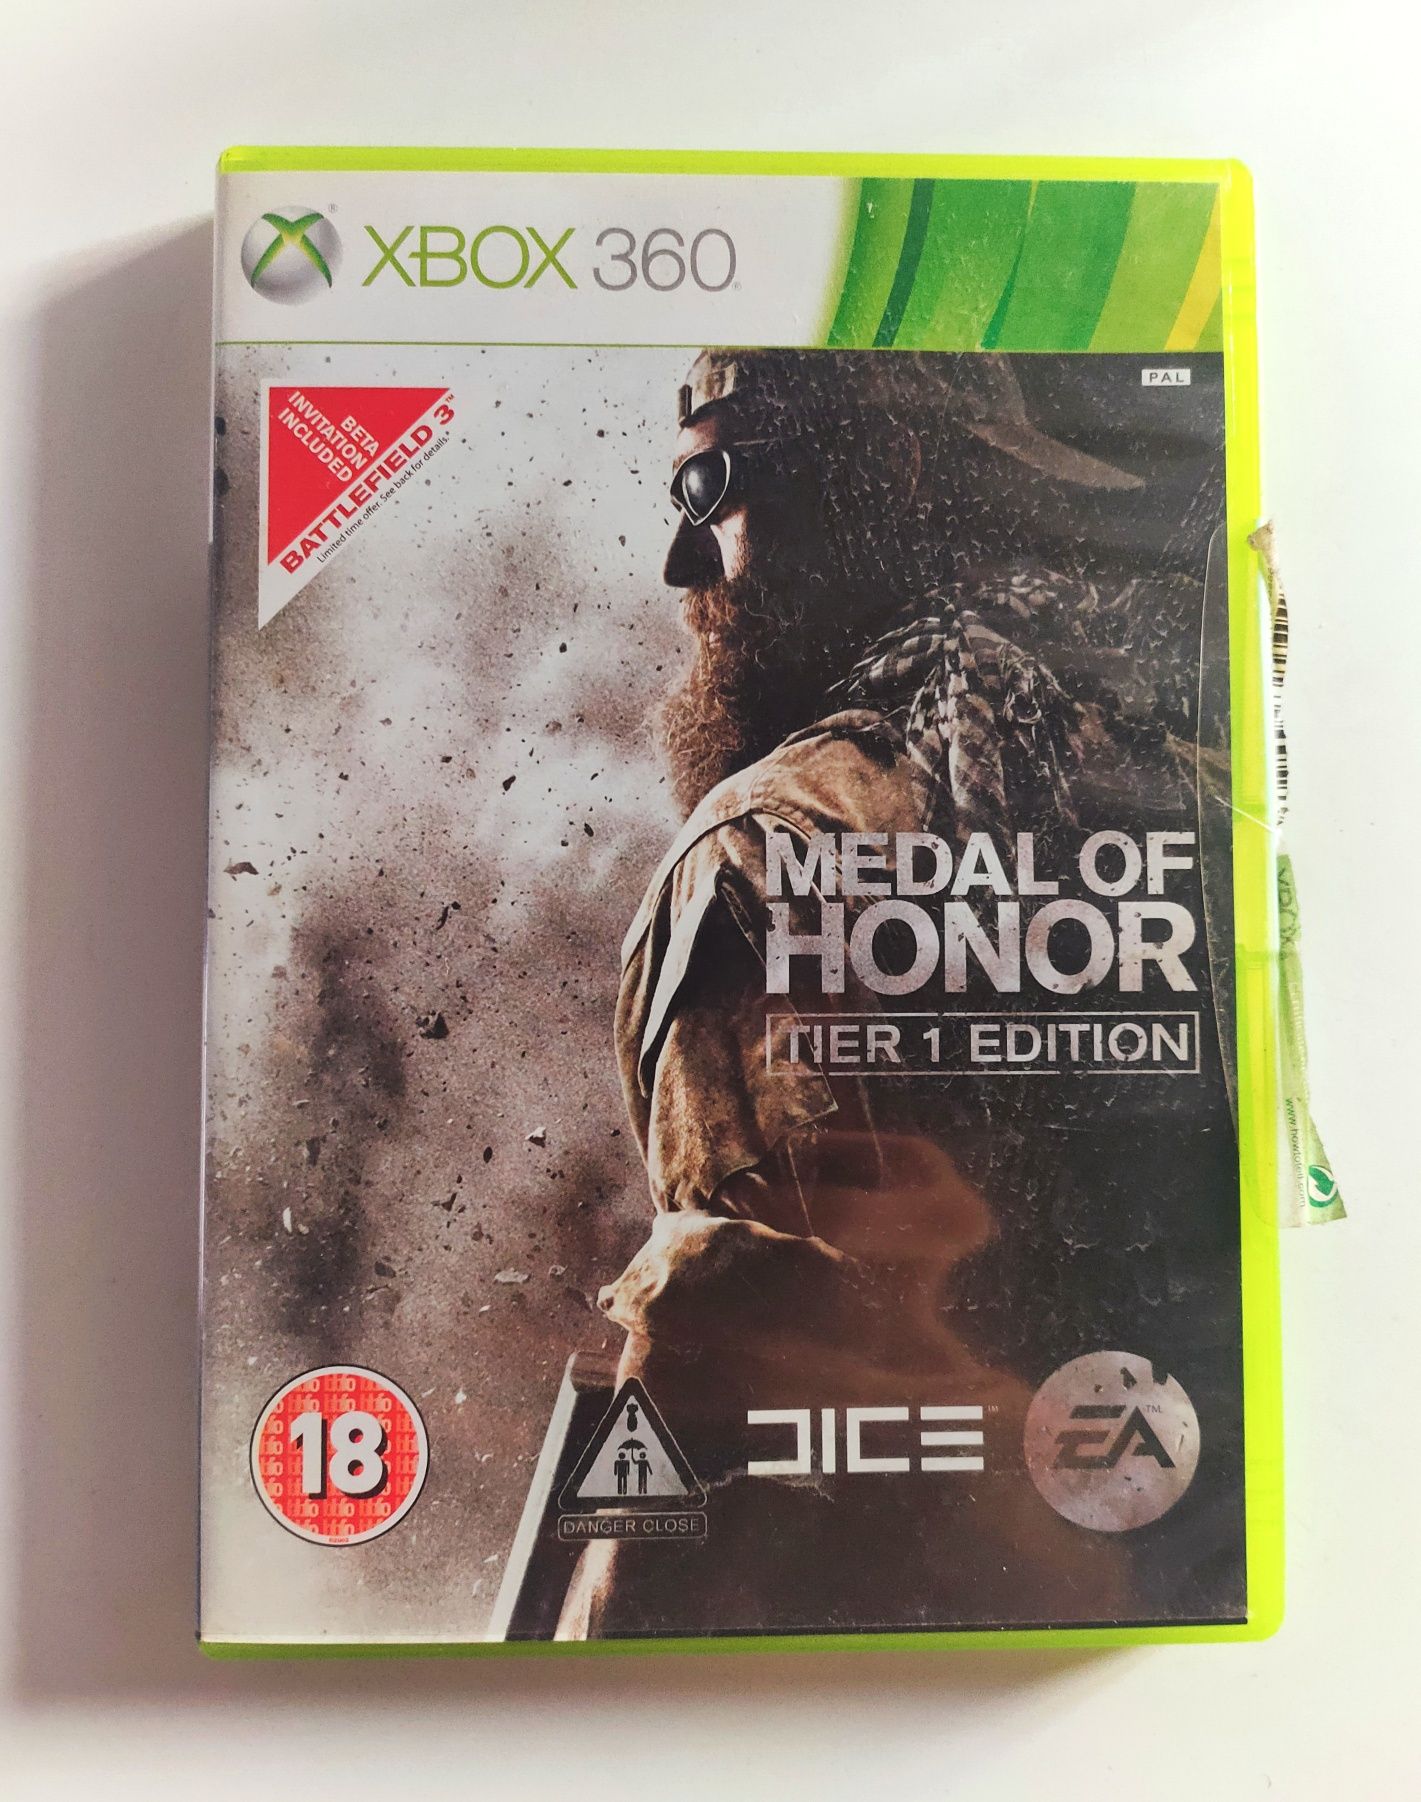 Medal of honor ther 1 edition Xbox 360 game/gra 18+